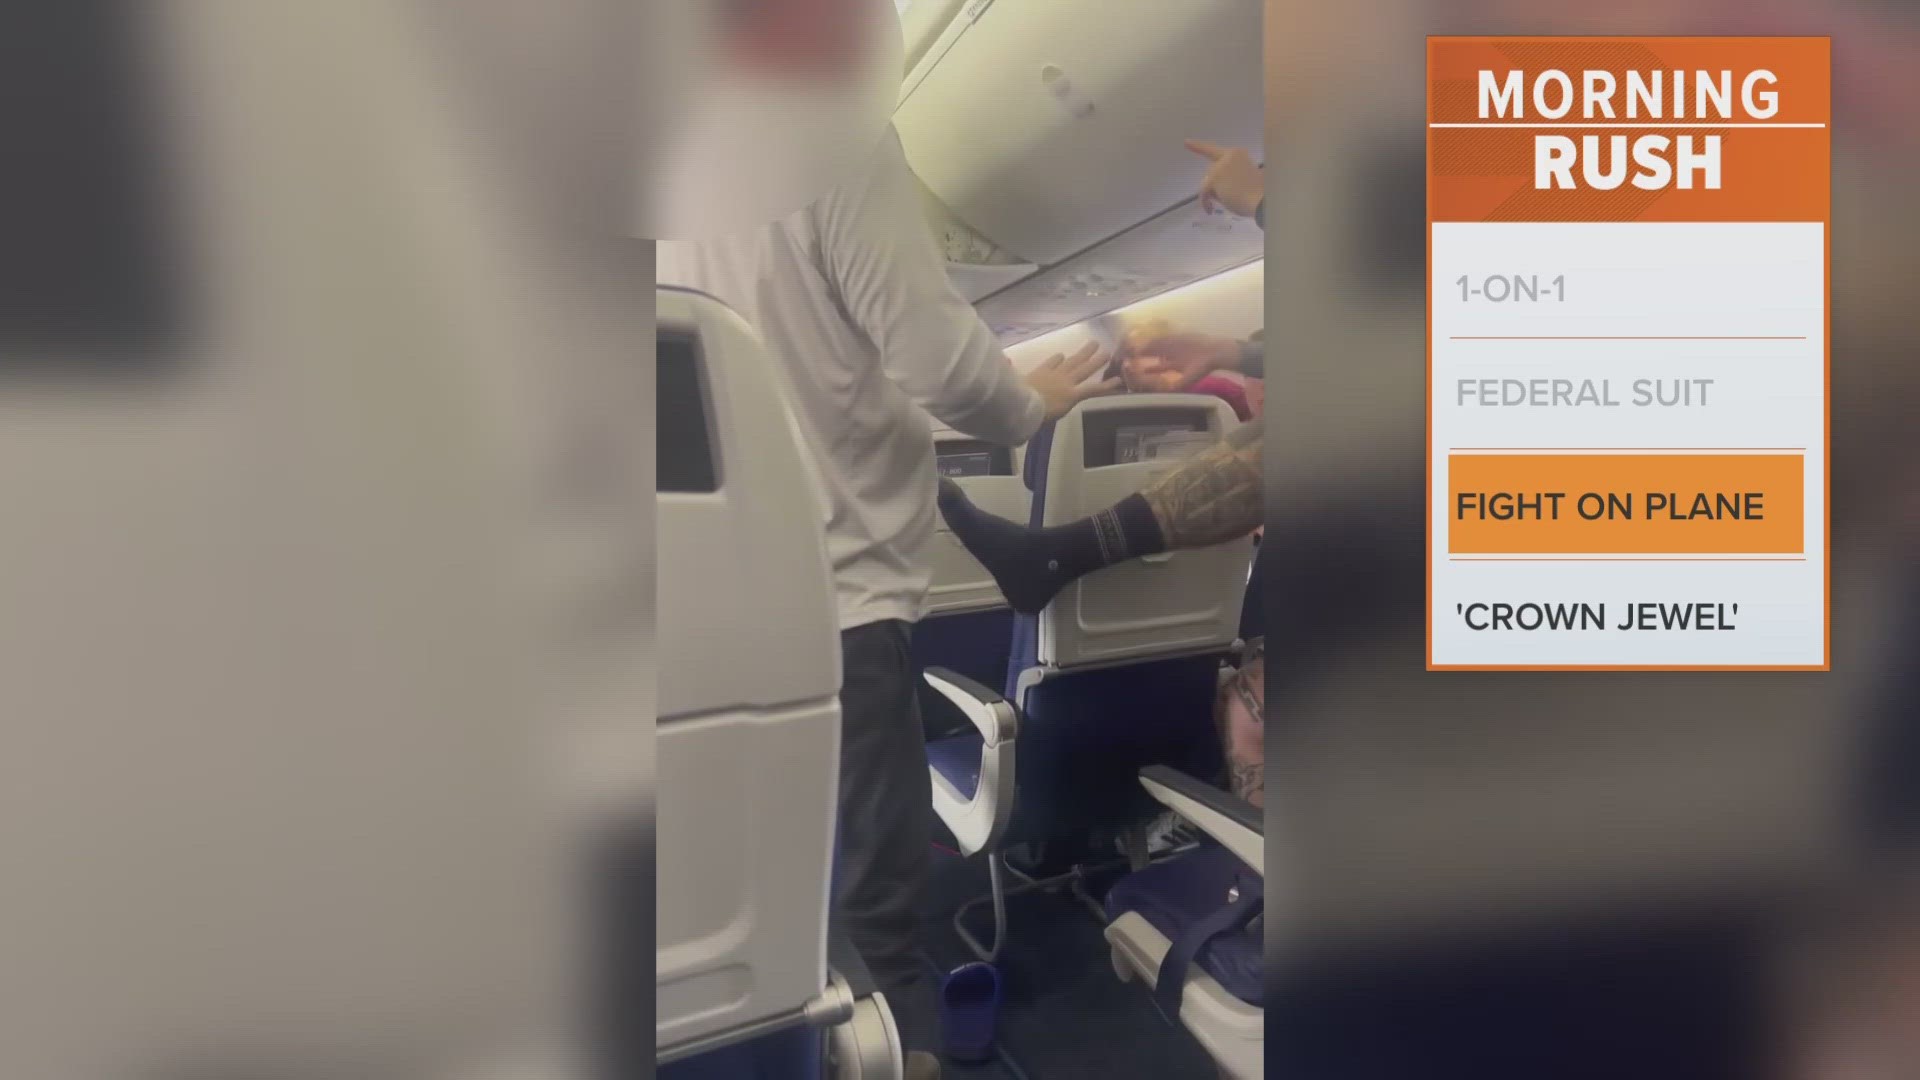 In a statement to WFAA, the airline acknowledged that the incident occurred on a flight from Dallas to Phoenix, Arizona.